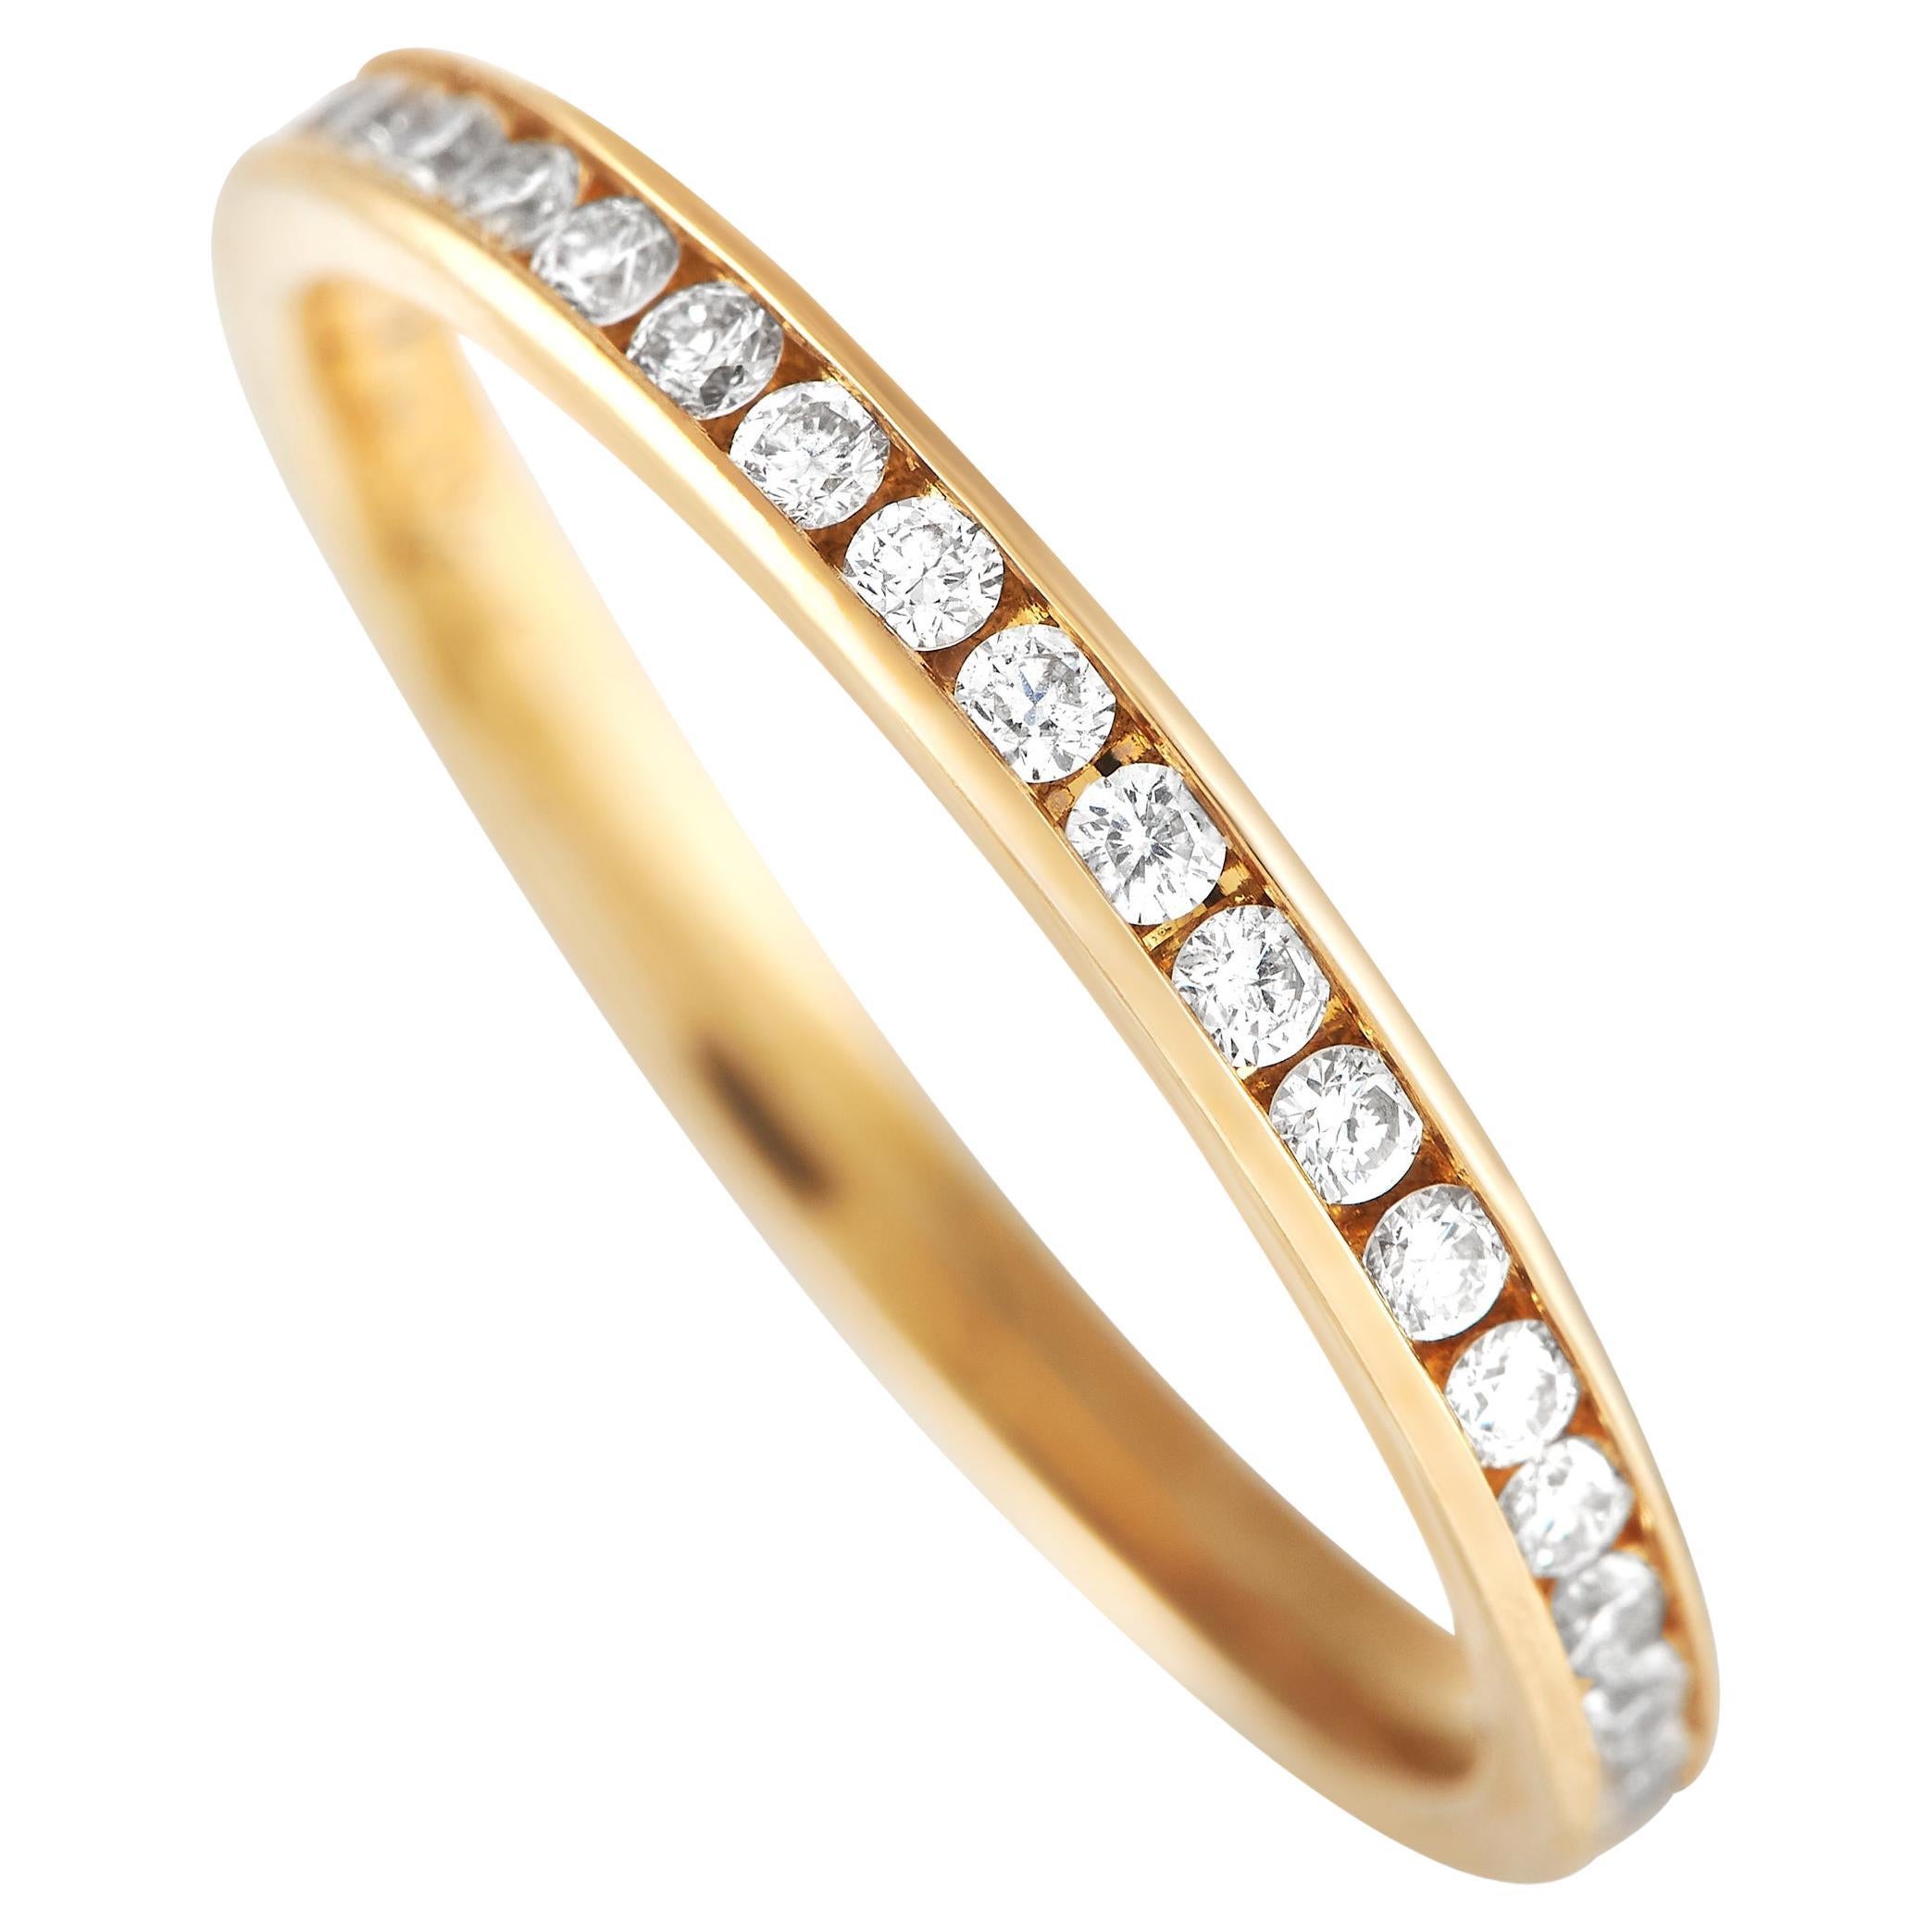 LB Exclusive 14k Yellow Gold 0.50 Carat Diamond Channel-Set Band Ring